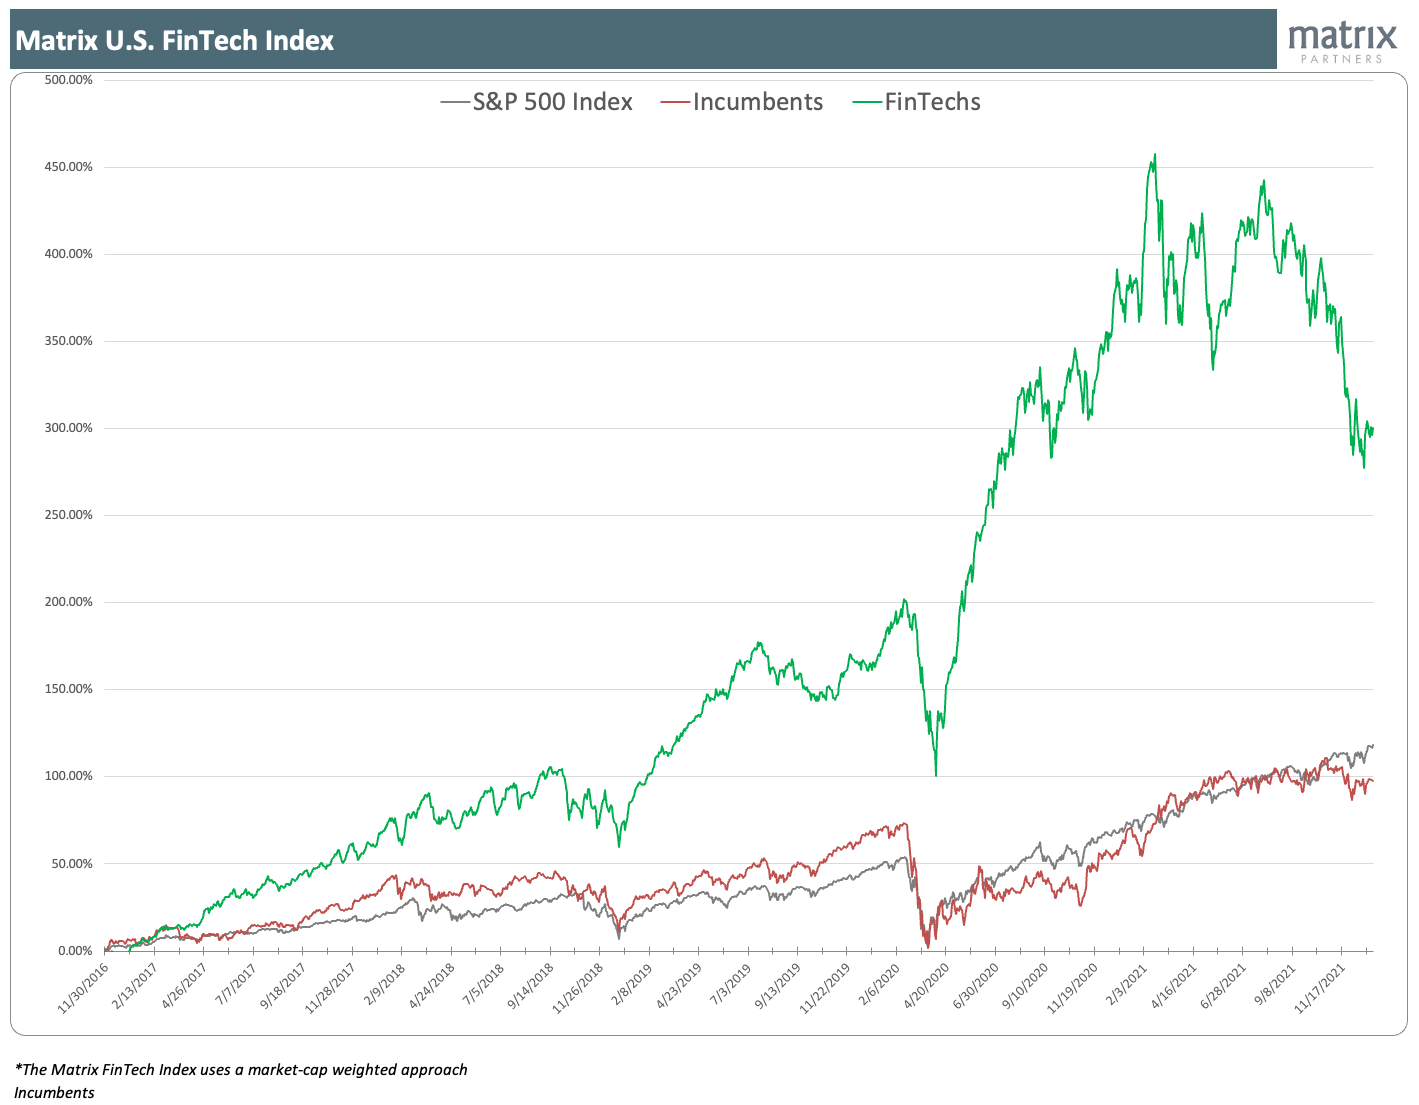 Matrix Fintech Index continued to beat the broader market as well as incumbent financial service companies